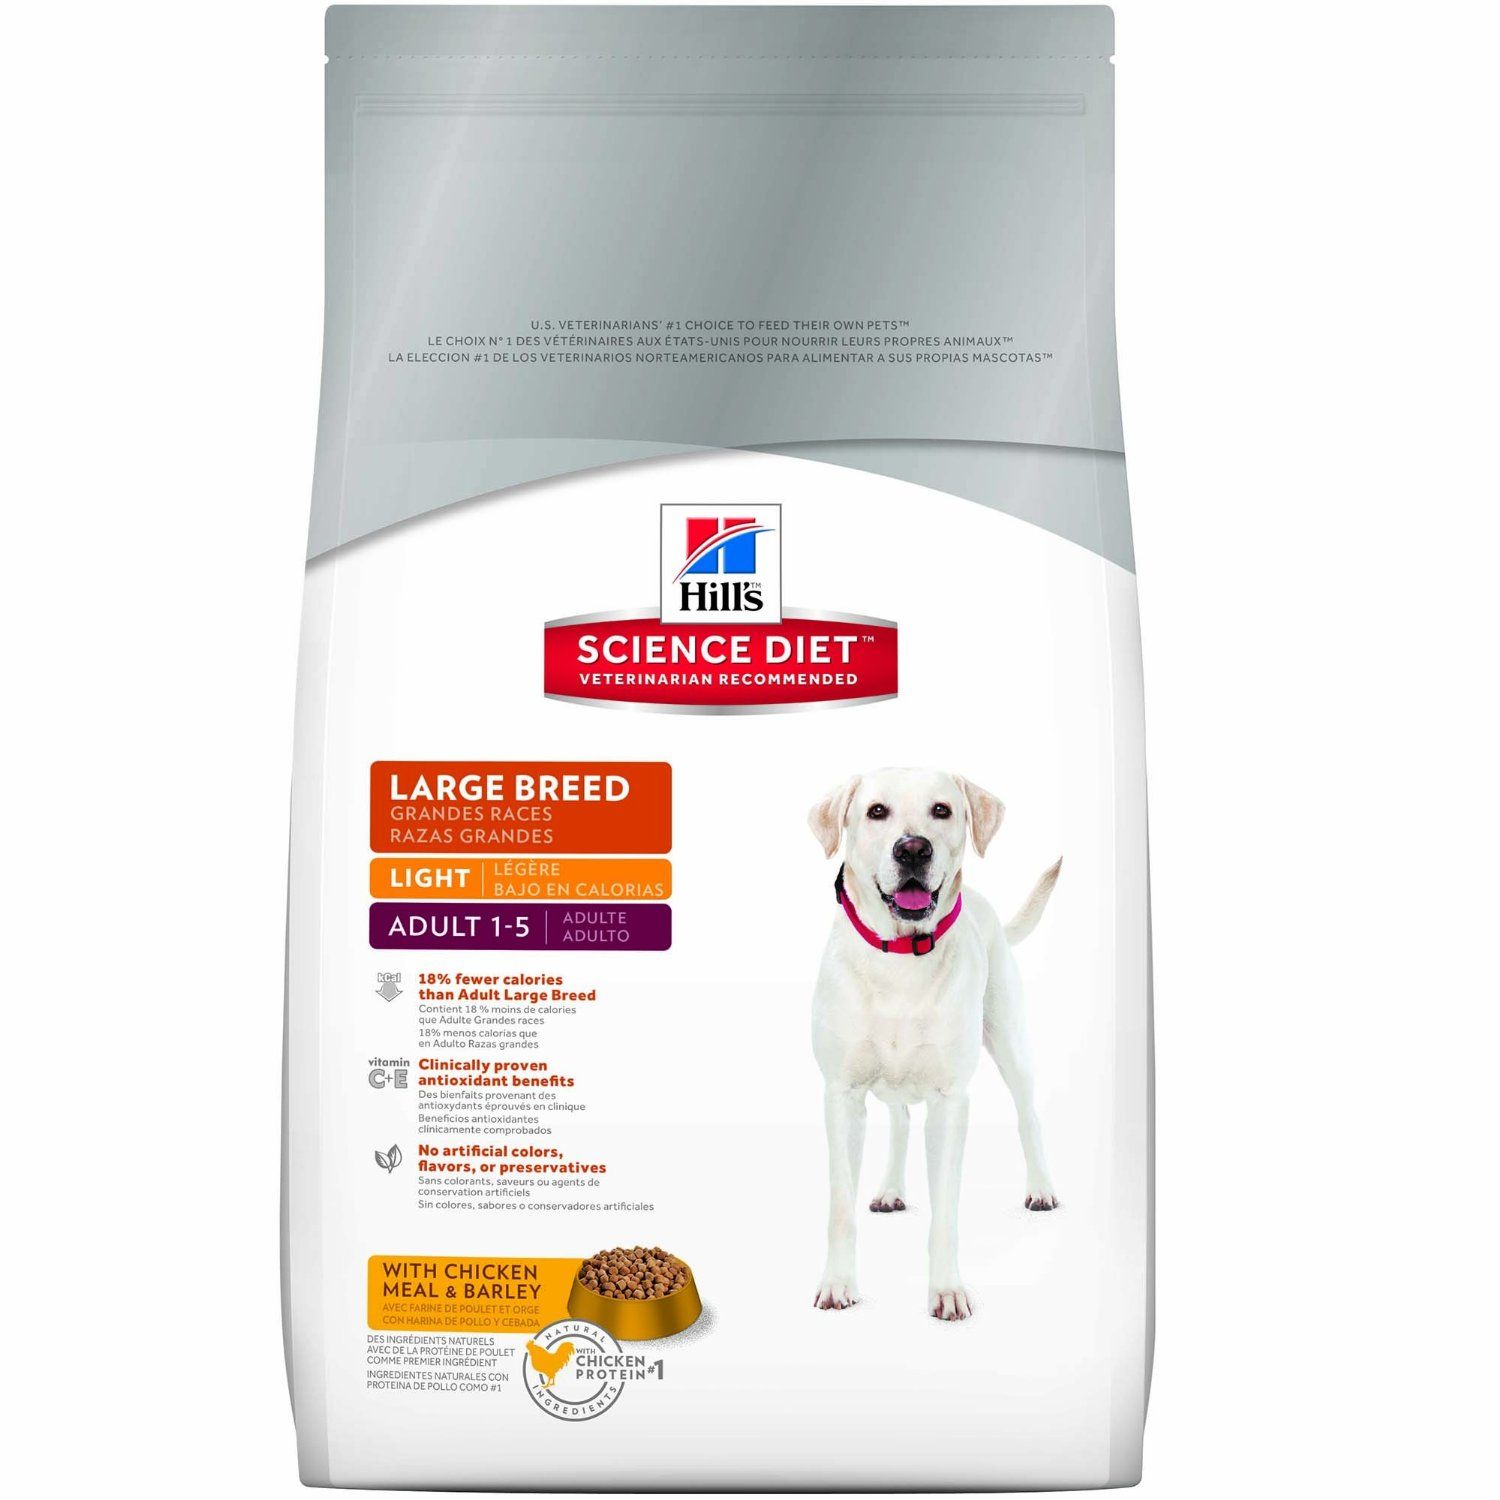 hills science diet large breed dry dog food special dog product